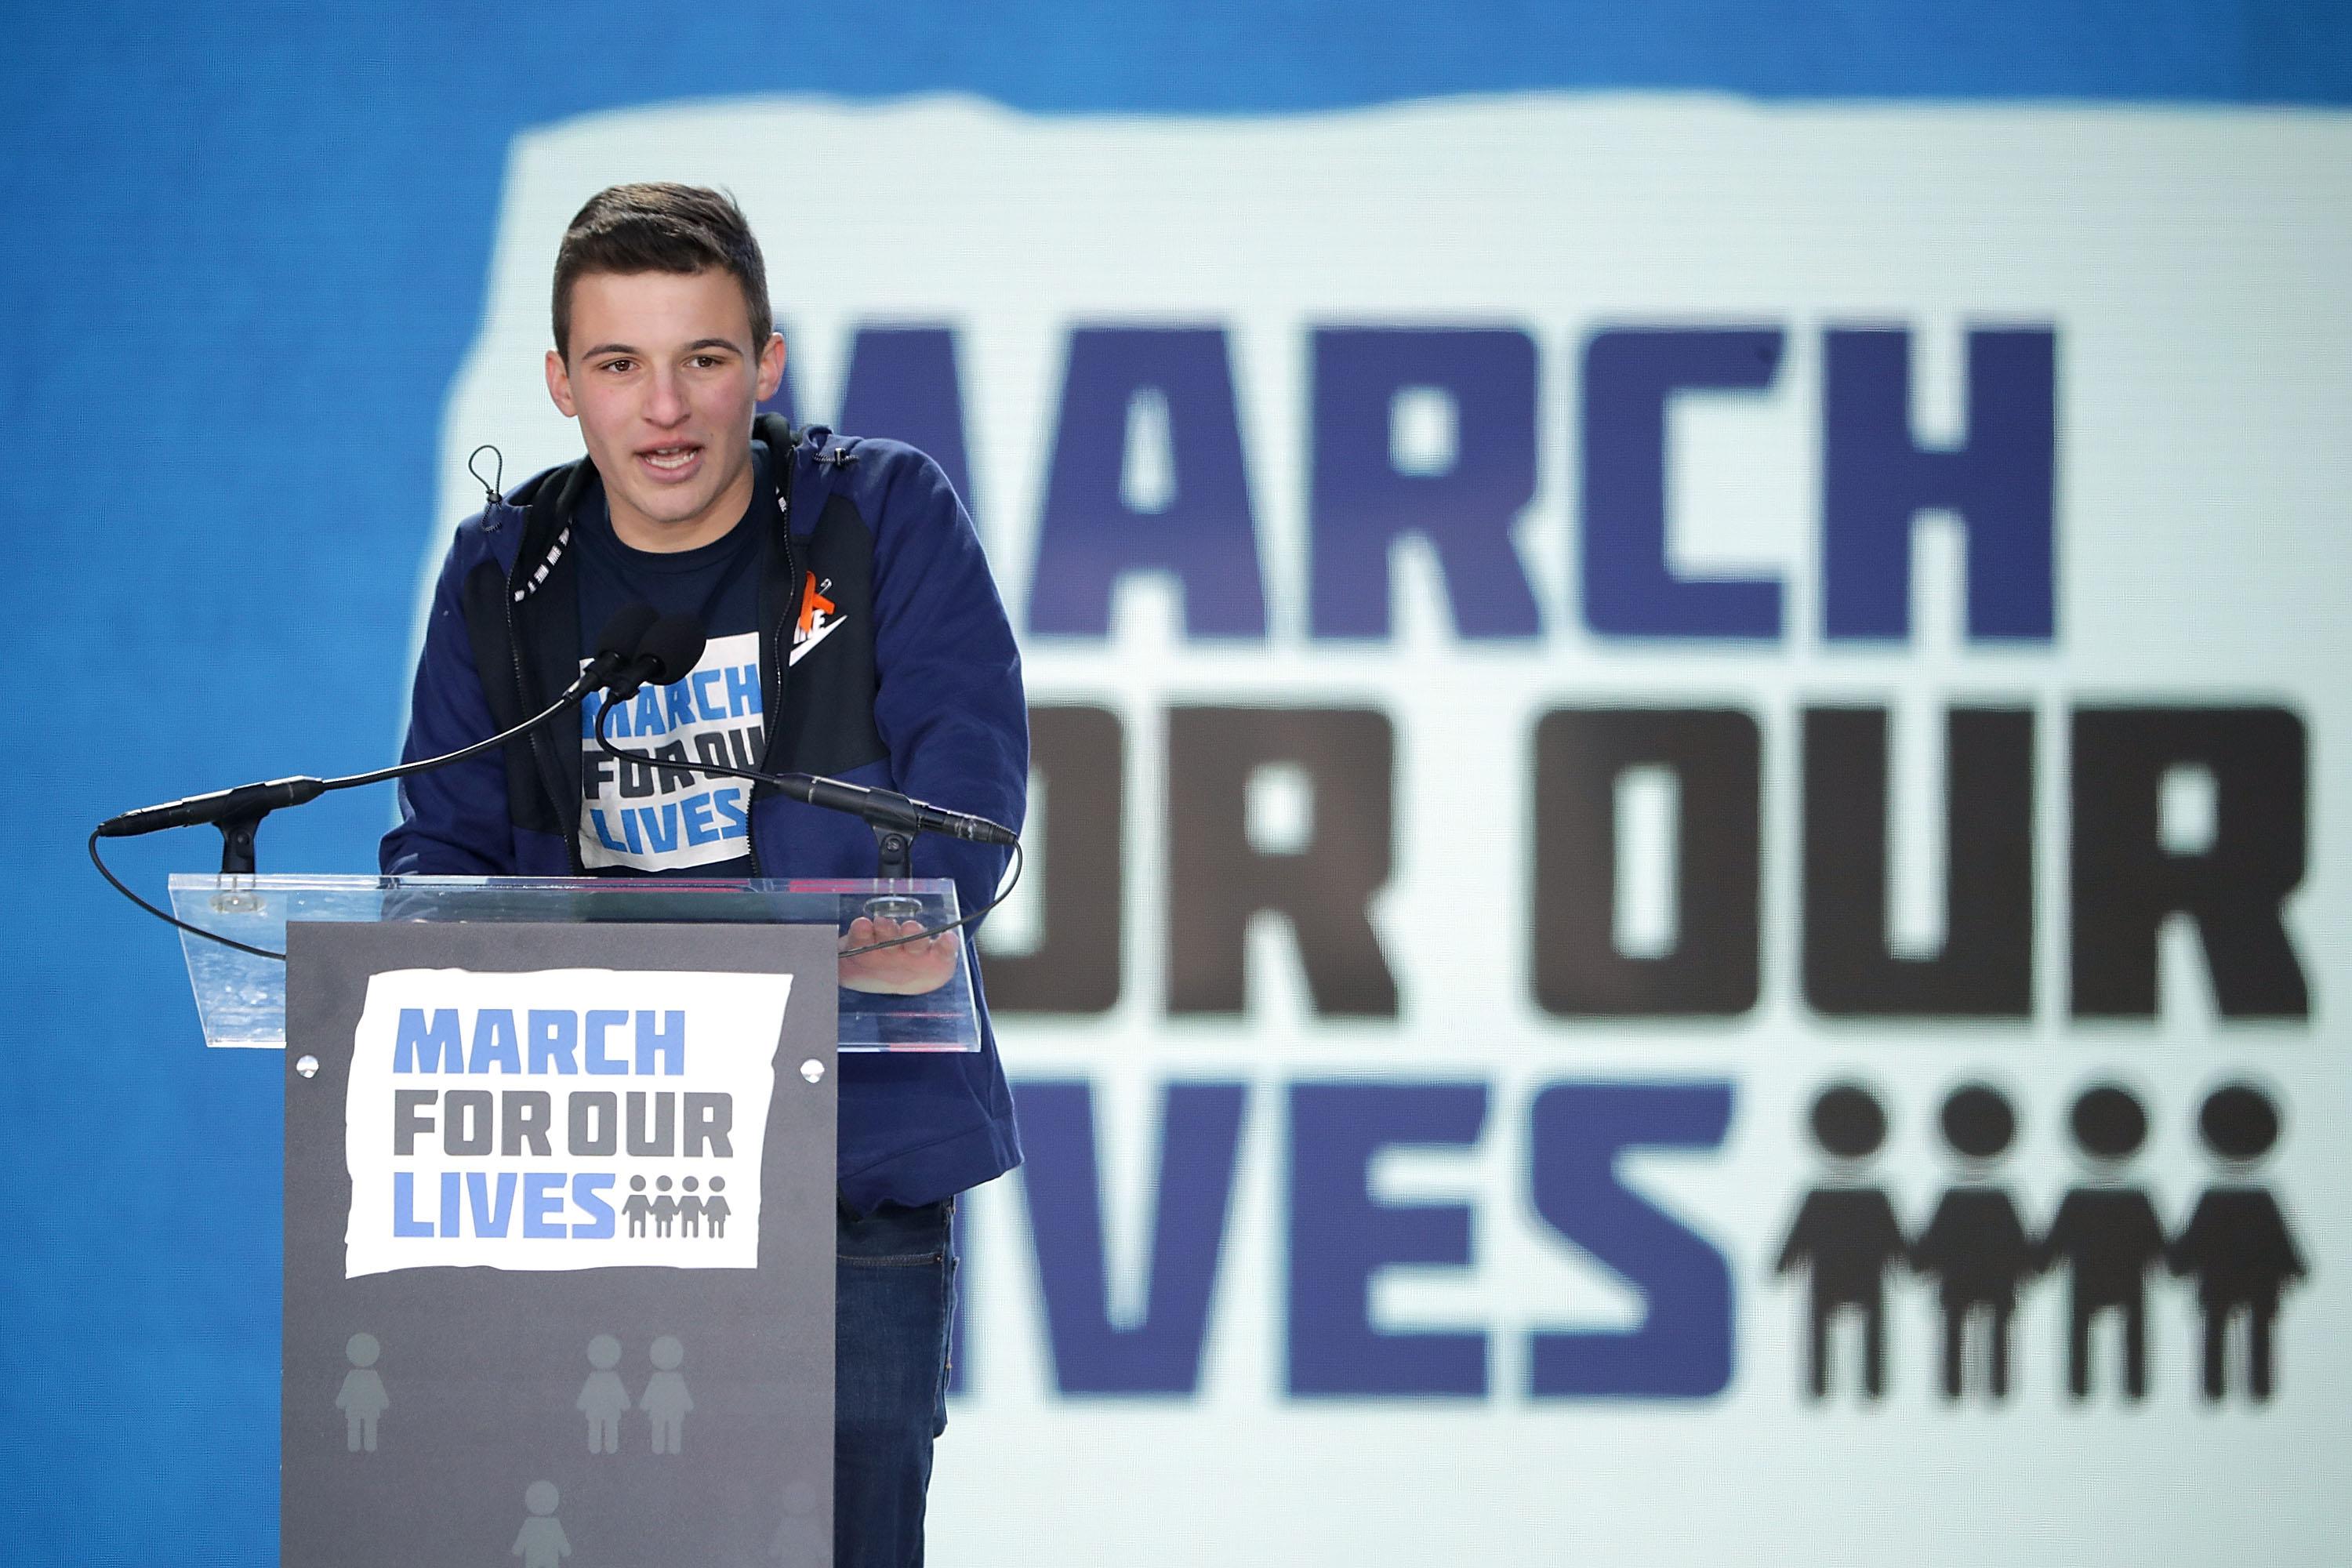 Marjory Stoneman Douglas High School Student Cameron Kasky addresses the March for Our Lives rally on March 24, 2018 in Washington, D.C. 